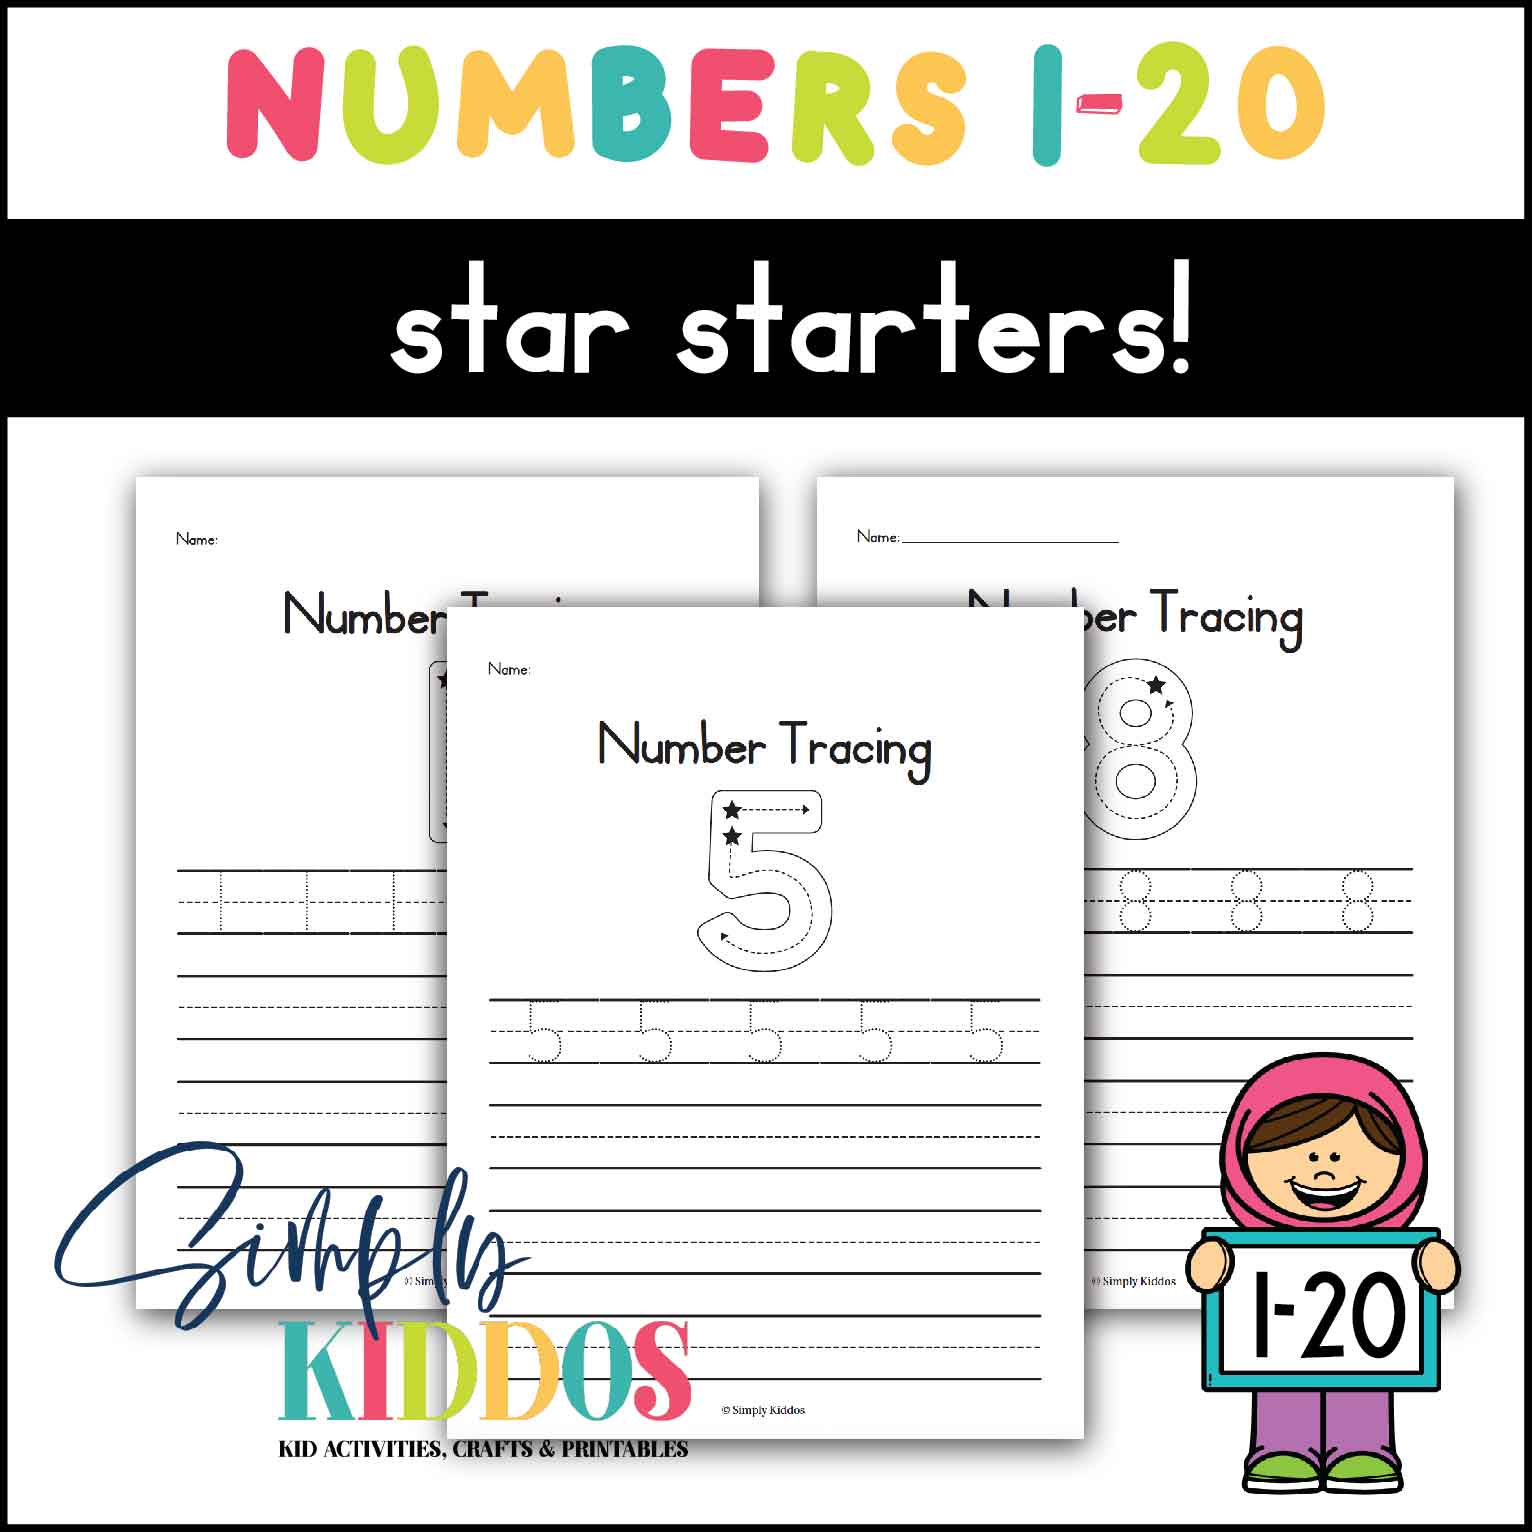 Number Tracing Worksheet 1-20 Example